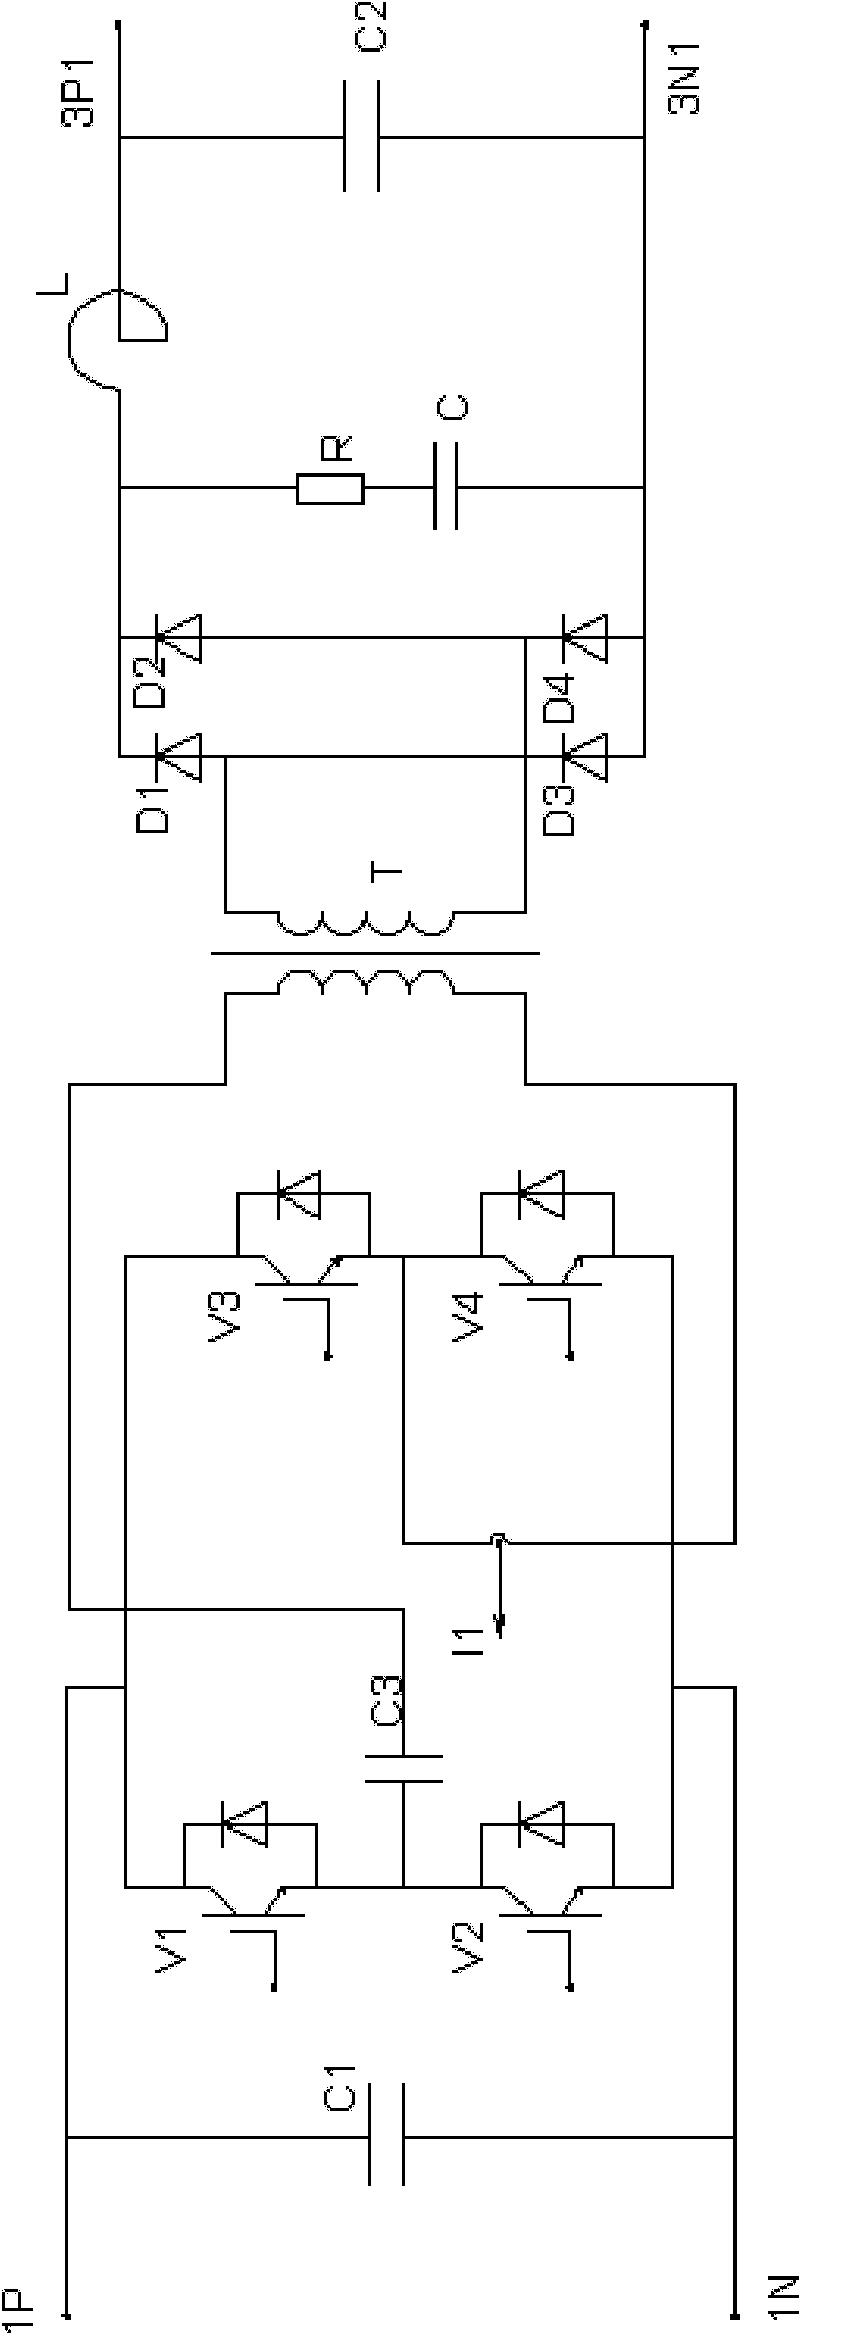 High-power high-accuracy power supply with continuously adjustable voltage